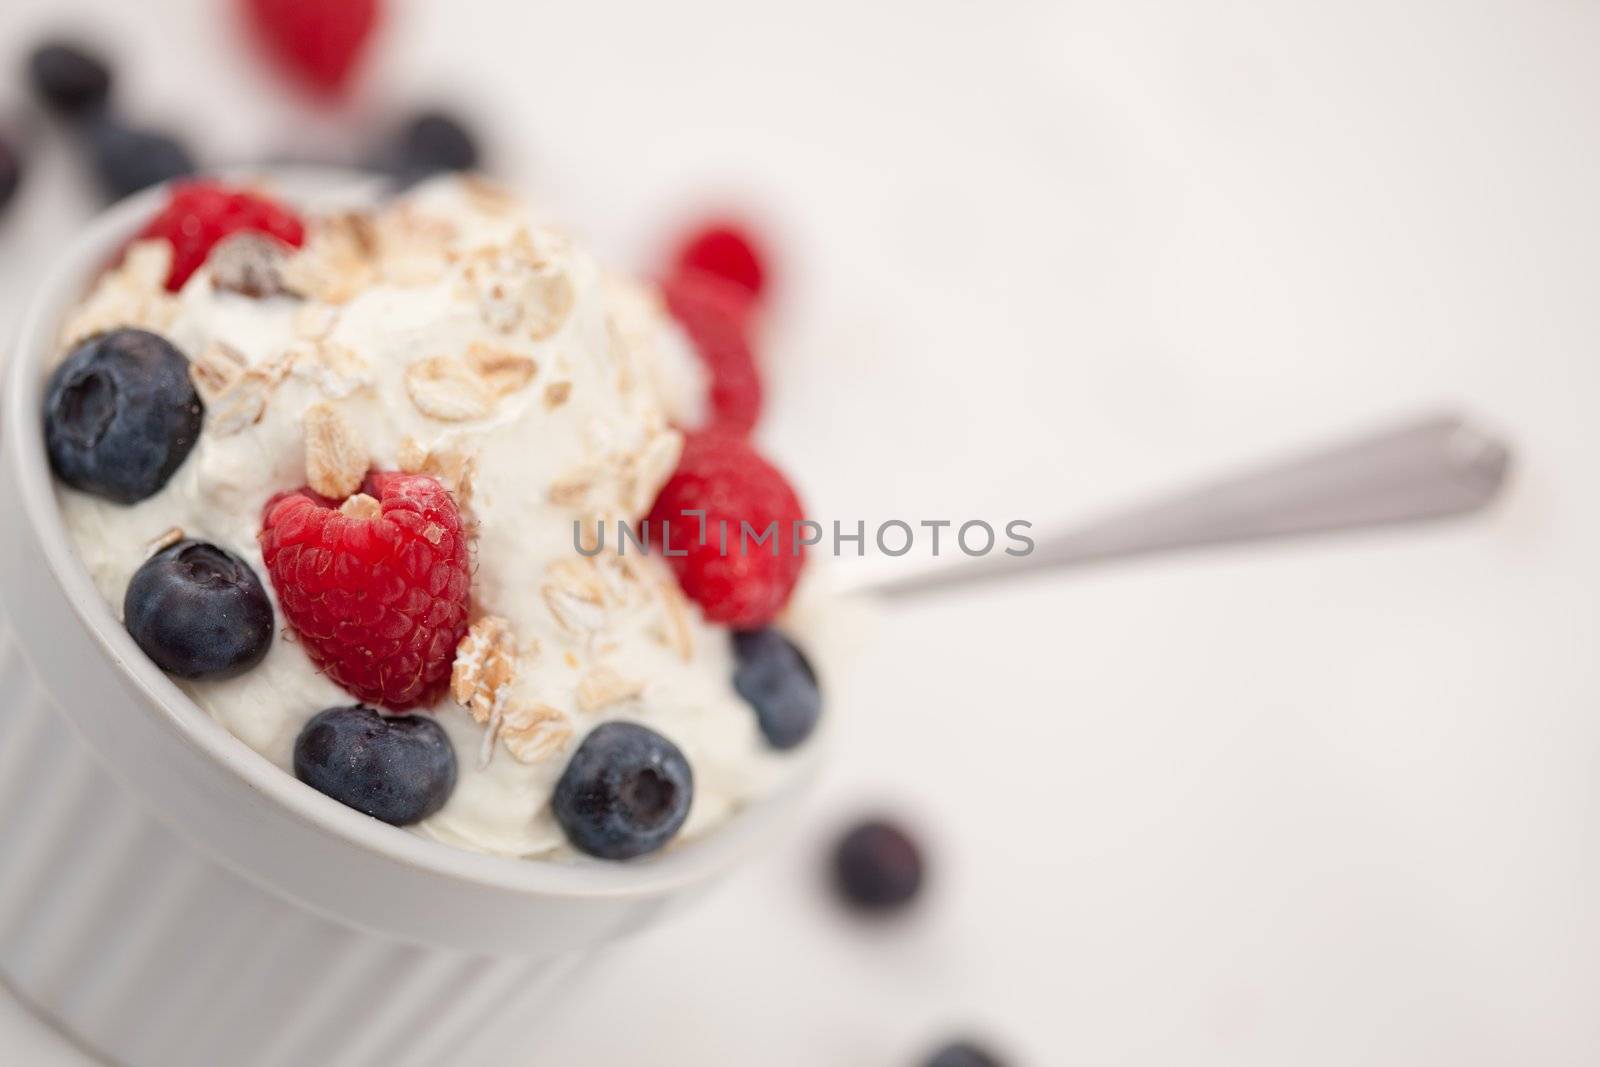 Jar of fruits and whipped cream with spoon against white background